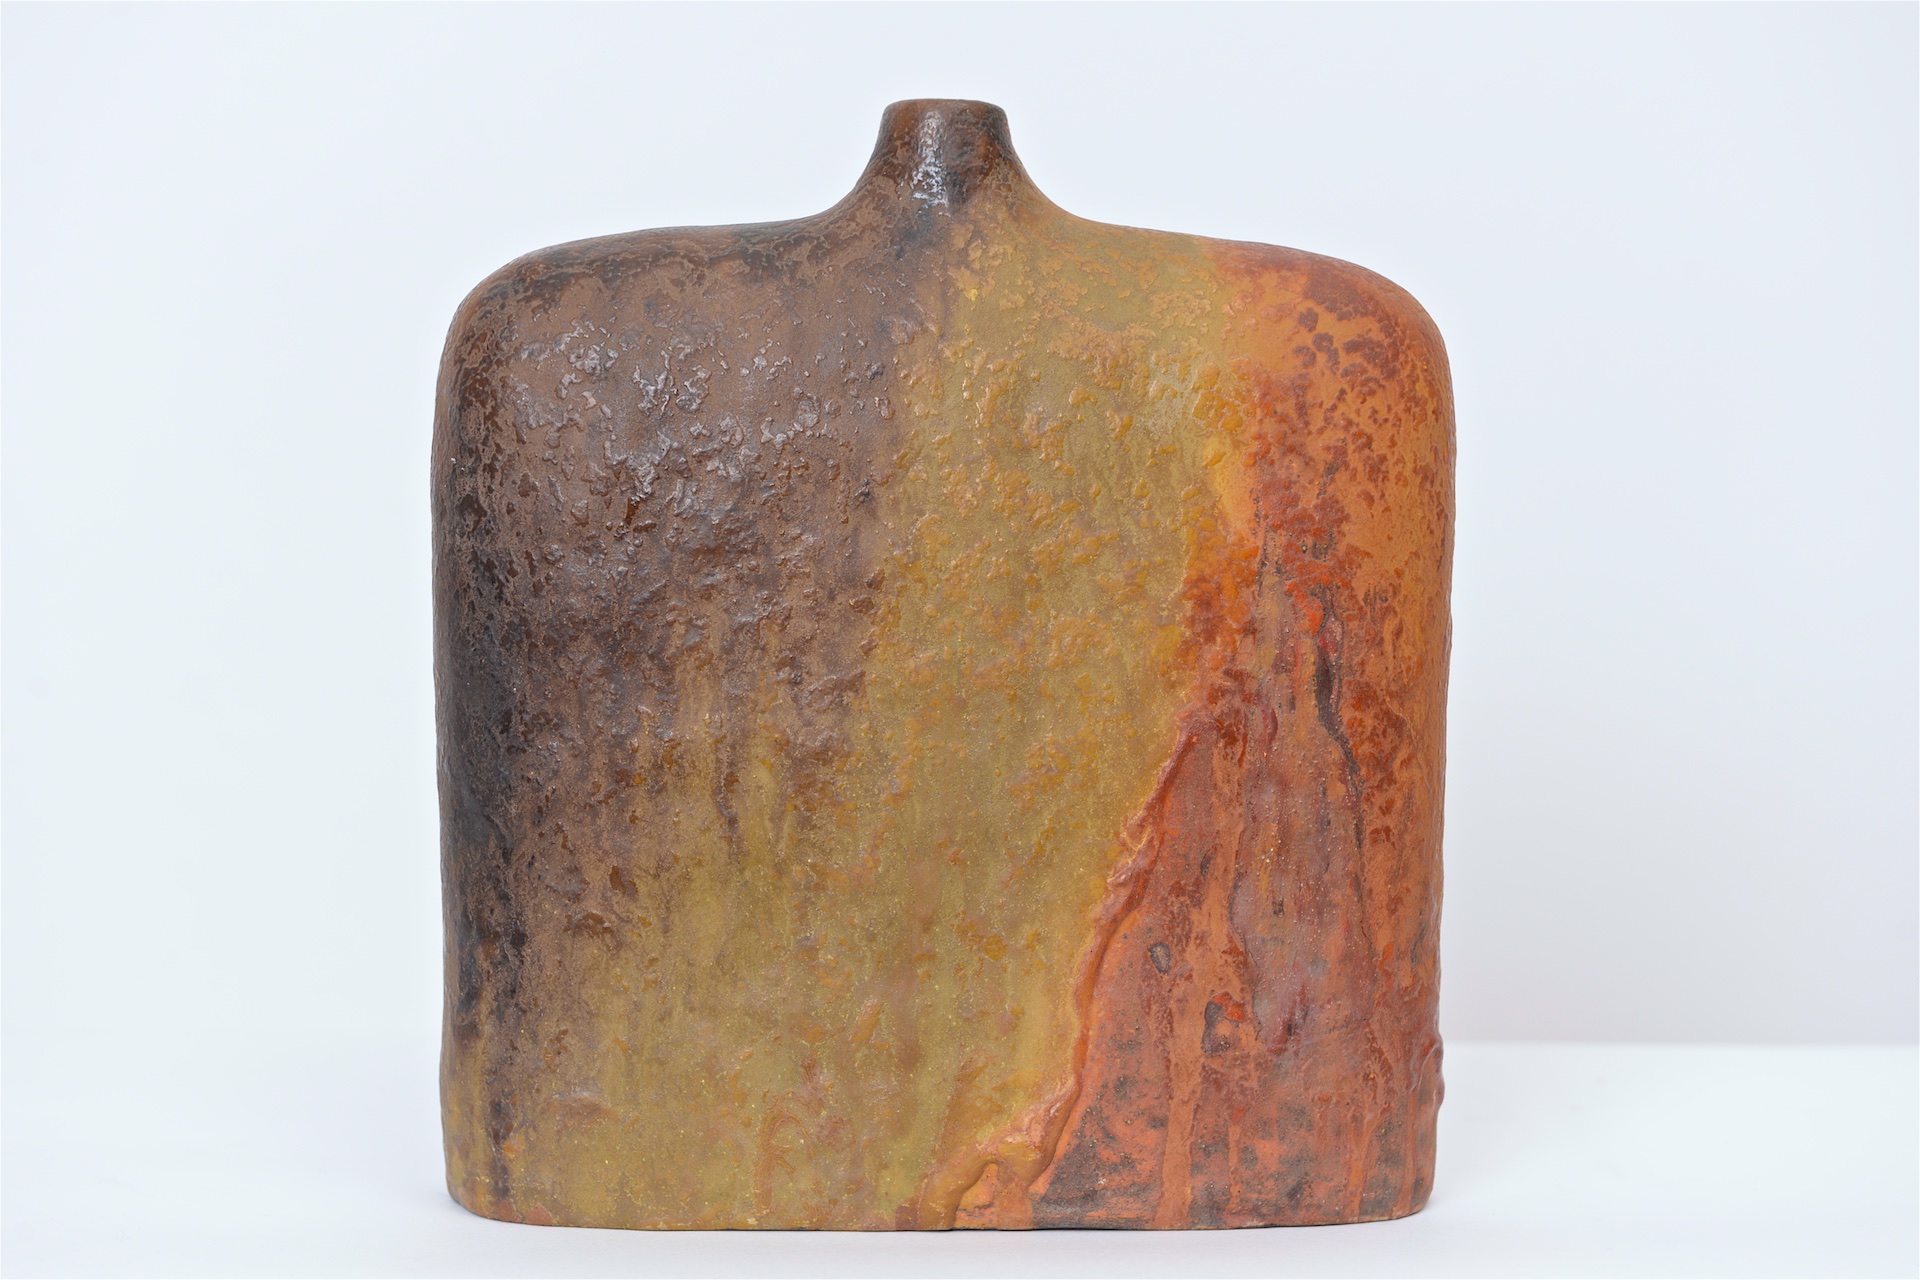 Abstract Ceramic Vase in Autumnal Glaze by Marcello Fantoni